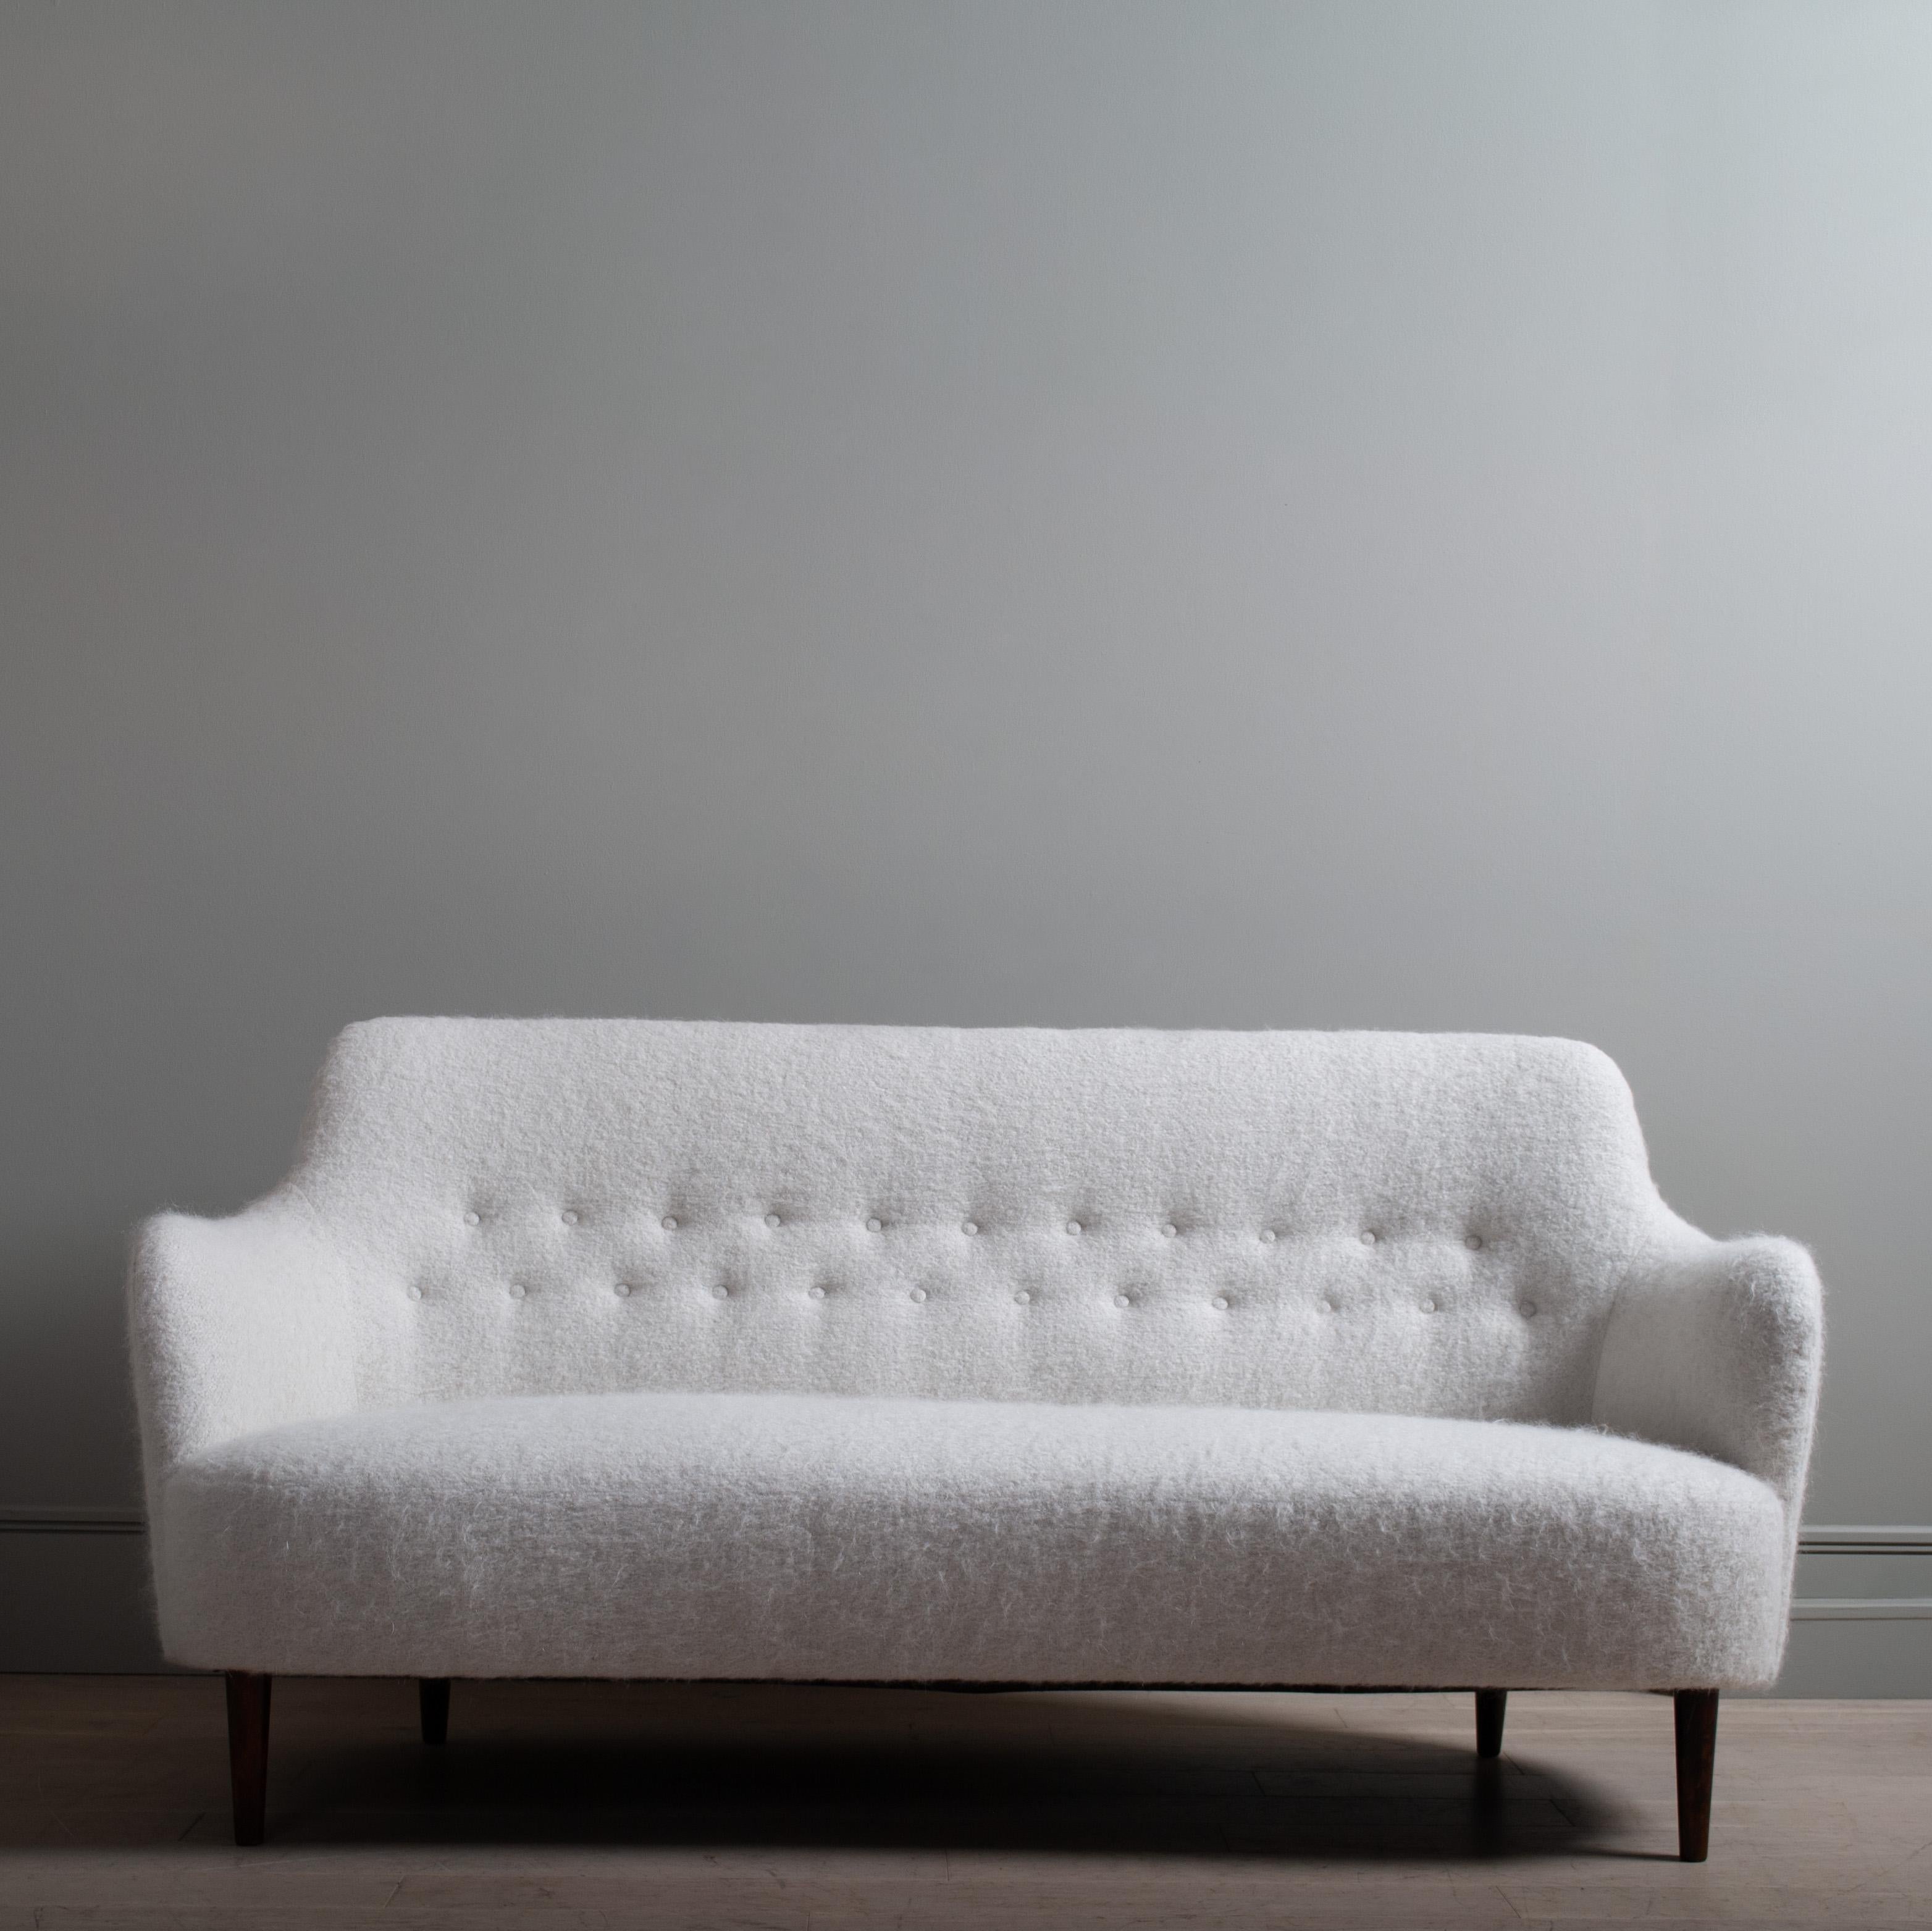 An original 1960s Samsas sofa by renowned Swedish designer Carl Malmsten for OH Sjogren. This sofa has been completely refurbished, reupholstered with new foam and covered in luxurious Pierre Frey Yeti fabric. Absolutely beautiful.
Contact us for